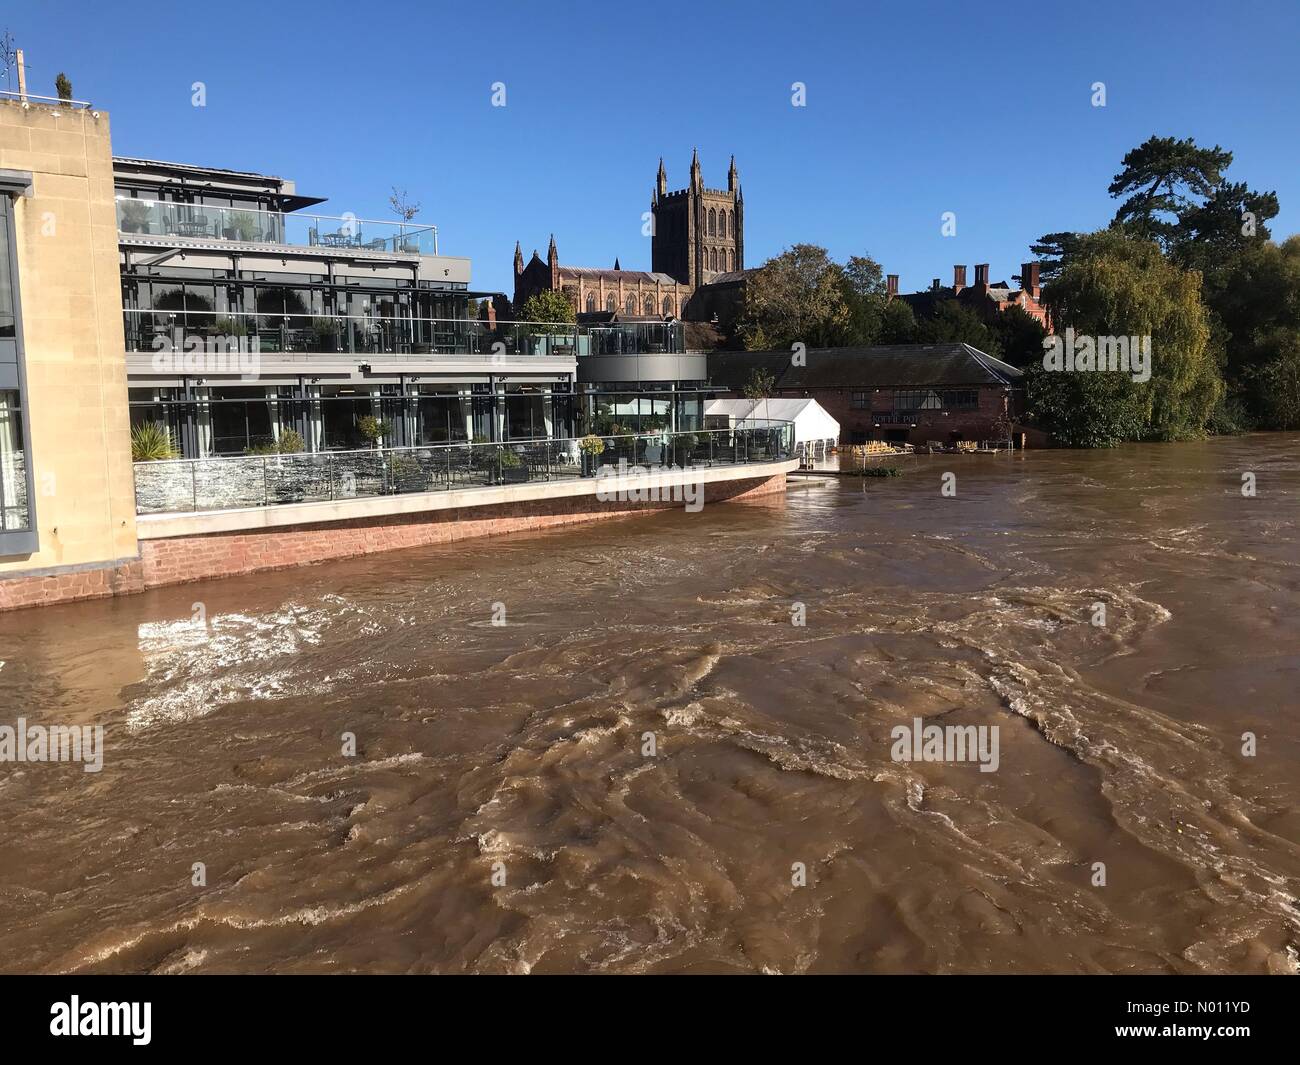 Hereford, UK. 27th Oct, 2019. UK Weather Flooding at Hereford UK - The River Wye is extremely high at Hereford with some flooding on the left bank including the De Koffie Pot pub. Credit: Steven May / StockimoNews/Alamy Live News Stock Photo